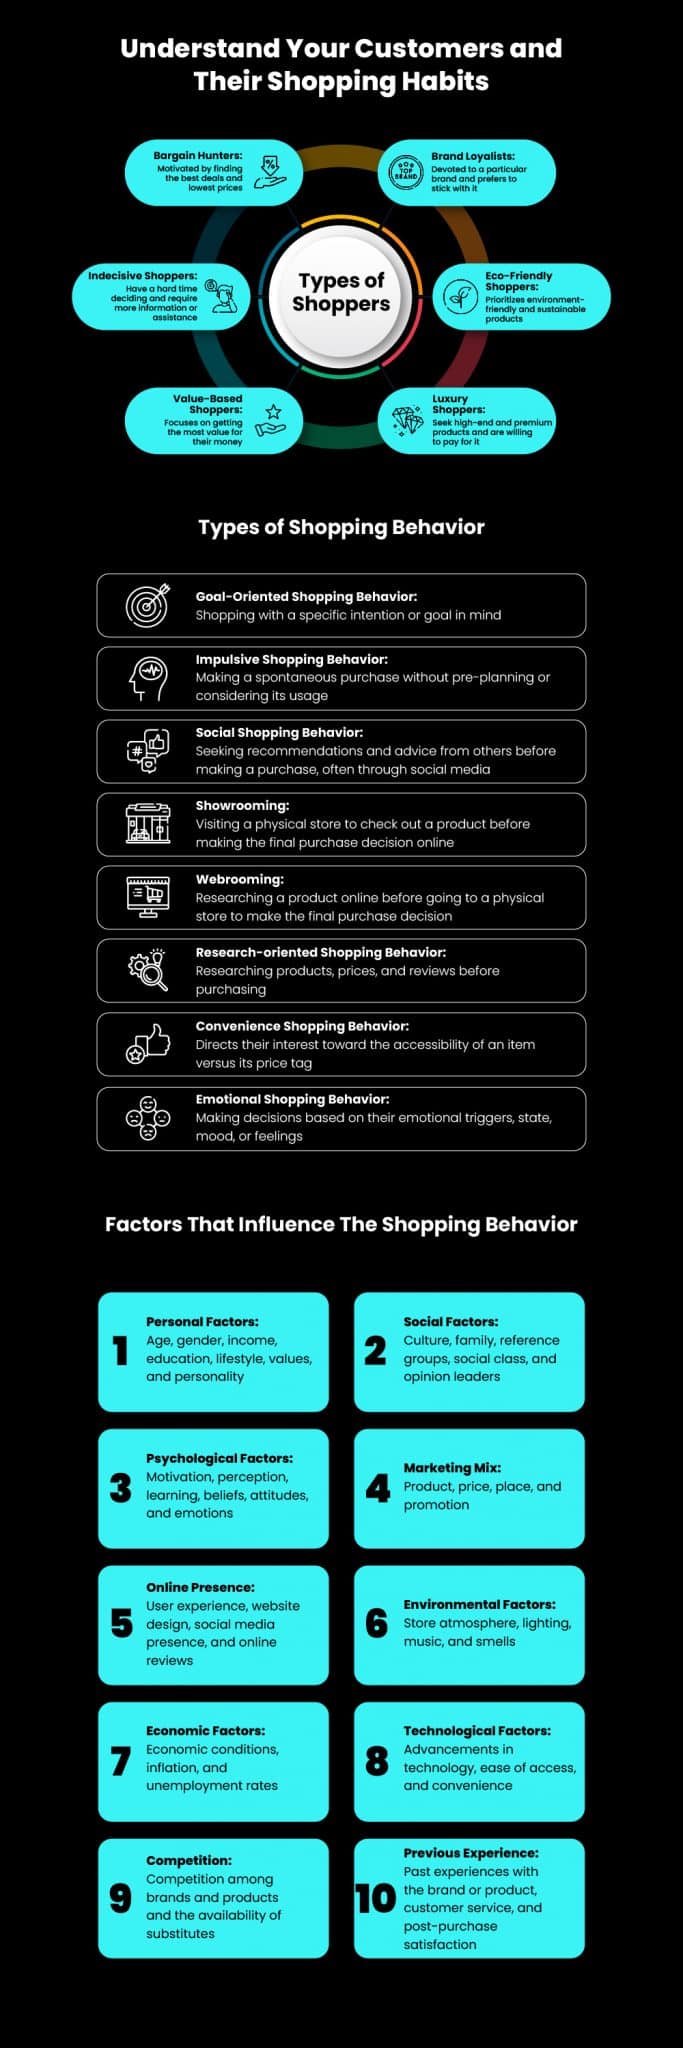 Understand Your Customers and Their Shopping Habits